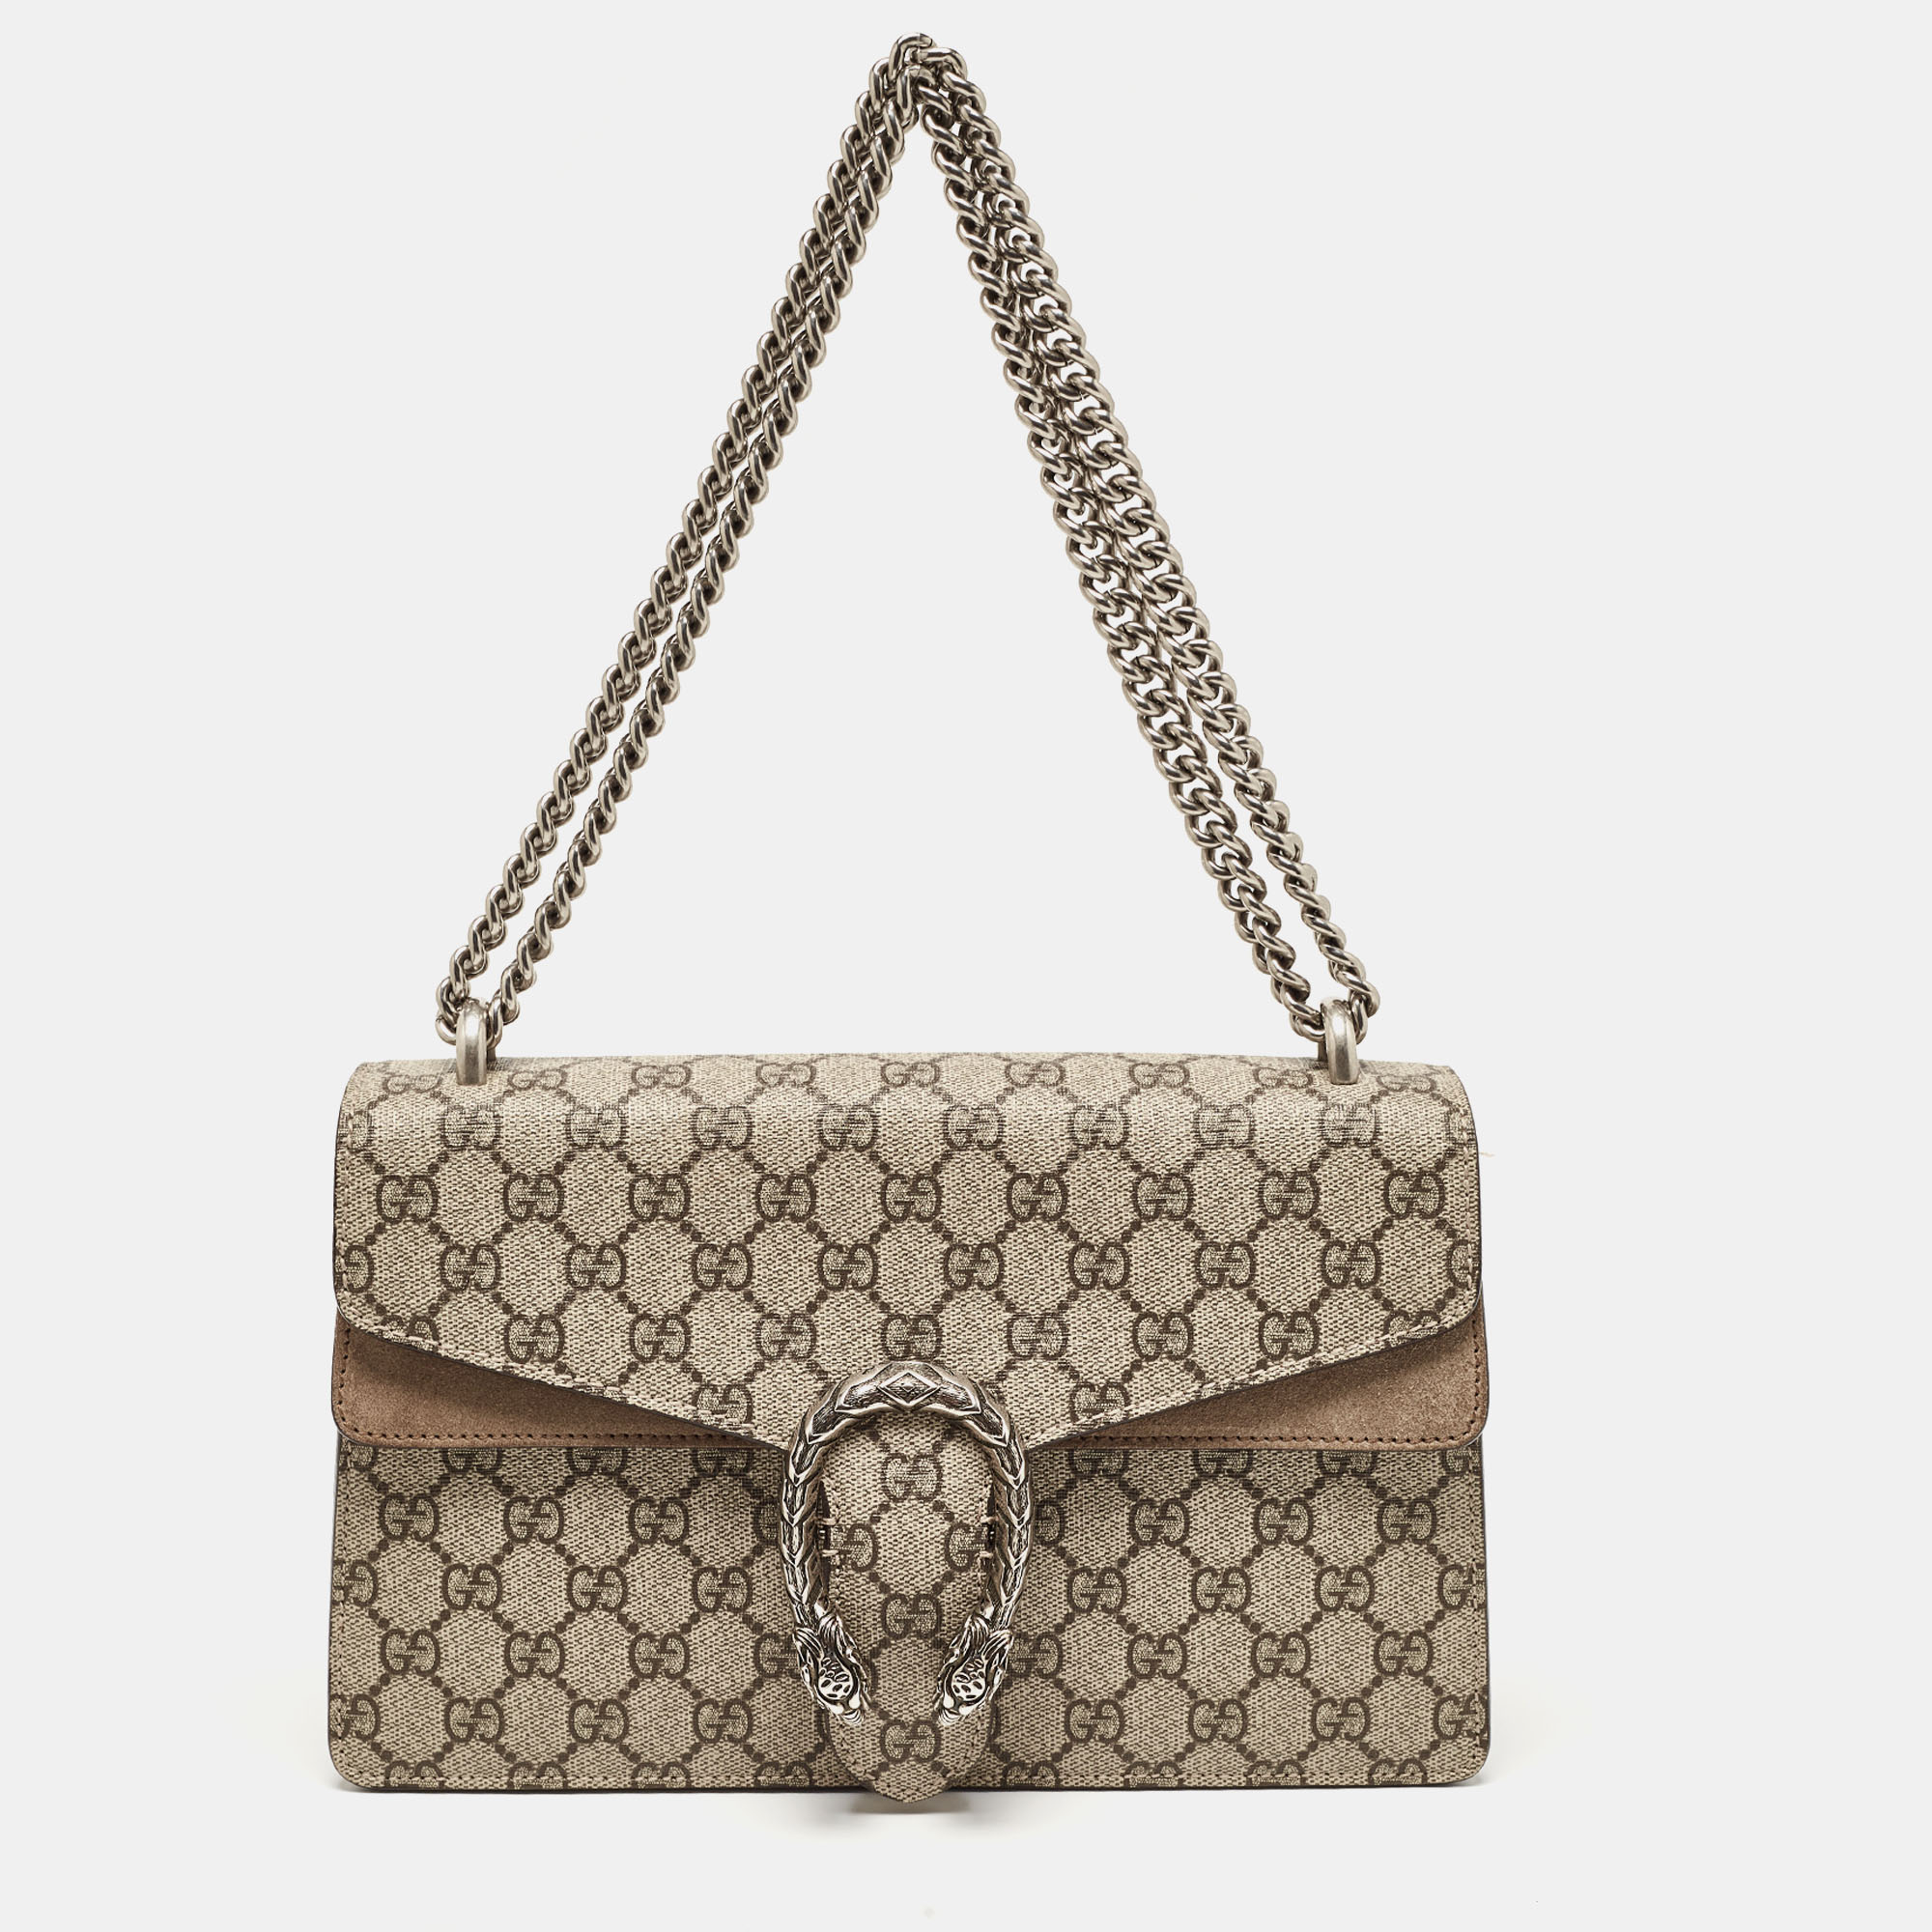 Picture yourself swinging this gorgeous bag at your outings with friends or at social gatherings and imagine how it will not only complement all your outfits but fetch you endless compliments. This Gucci creation has been beautifully crafted from GG Supreme canvas and suede. The flap carries tiger heads with reference to the Greek god Dionysus and it secures suede insides sized to dutifully hold your essentials. The bag is equipped with a chain link just so you can easily flaunt it.